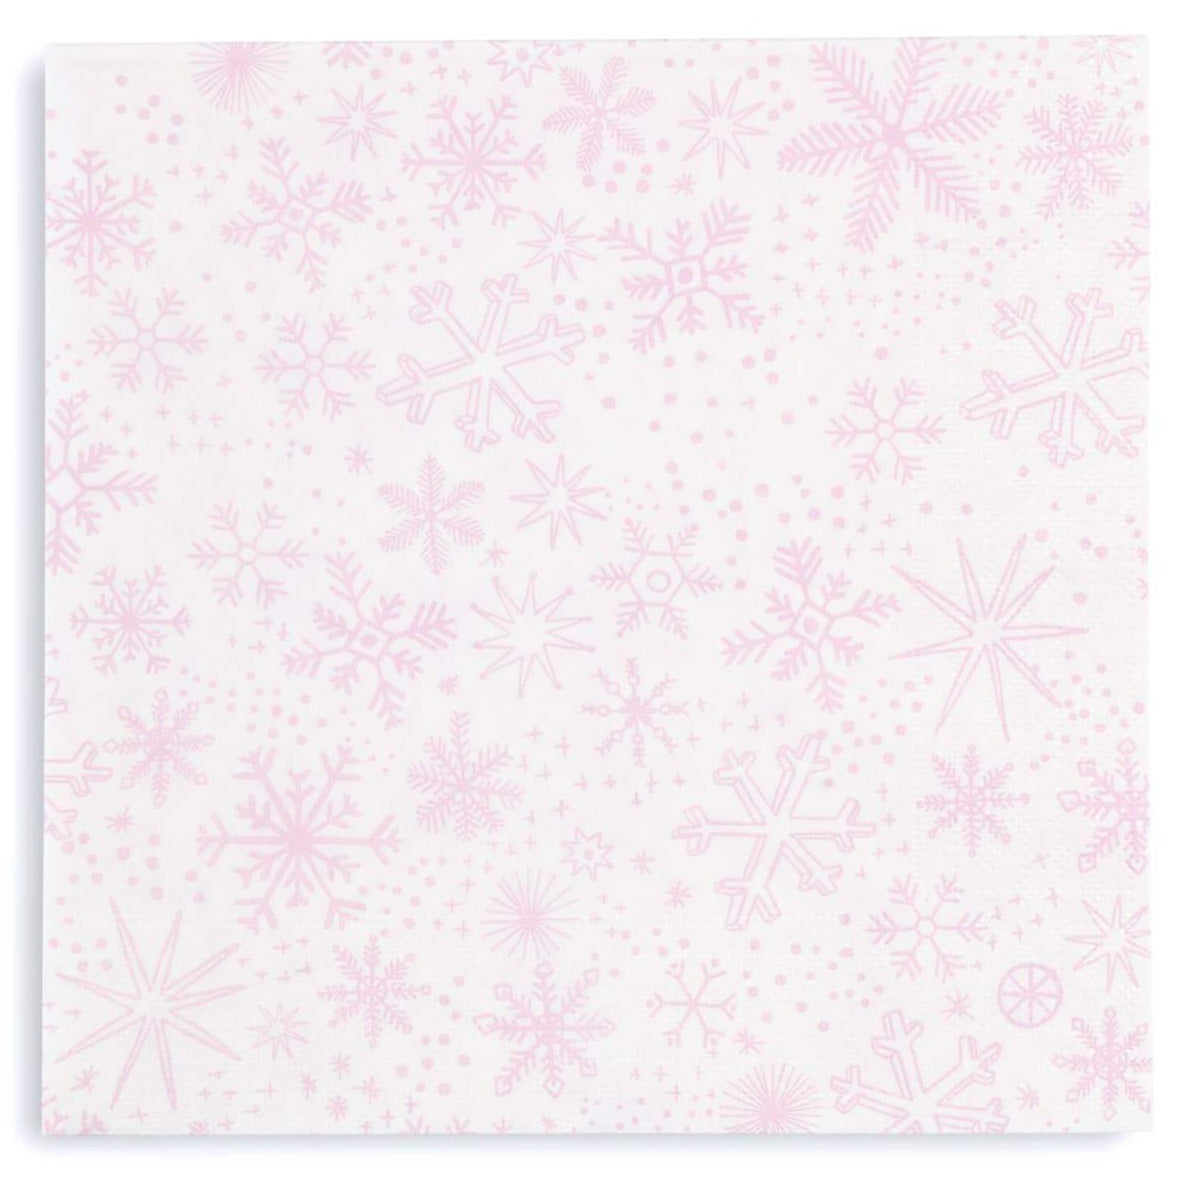 FROSTED LARGE NAPKINS - 16 PK